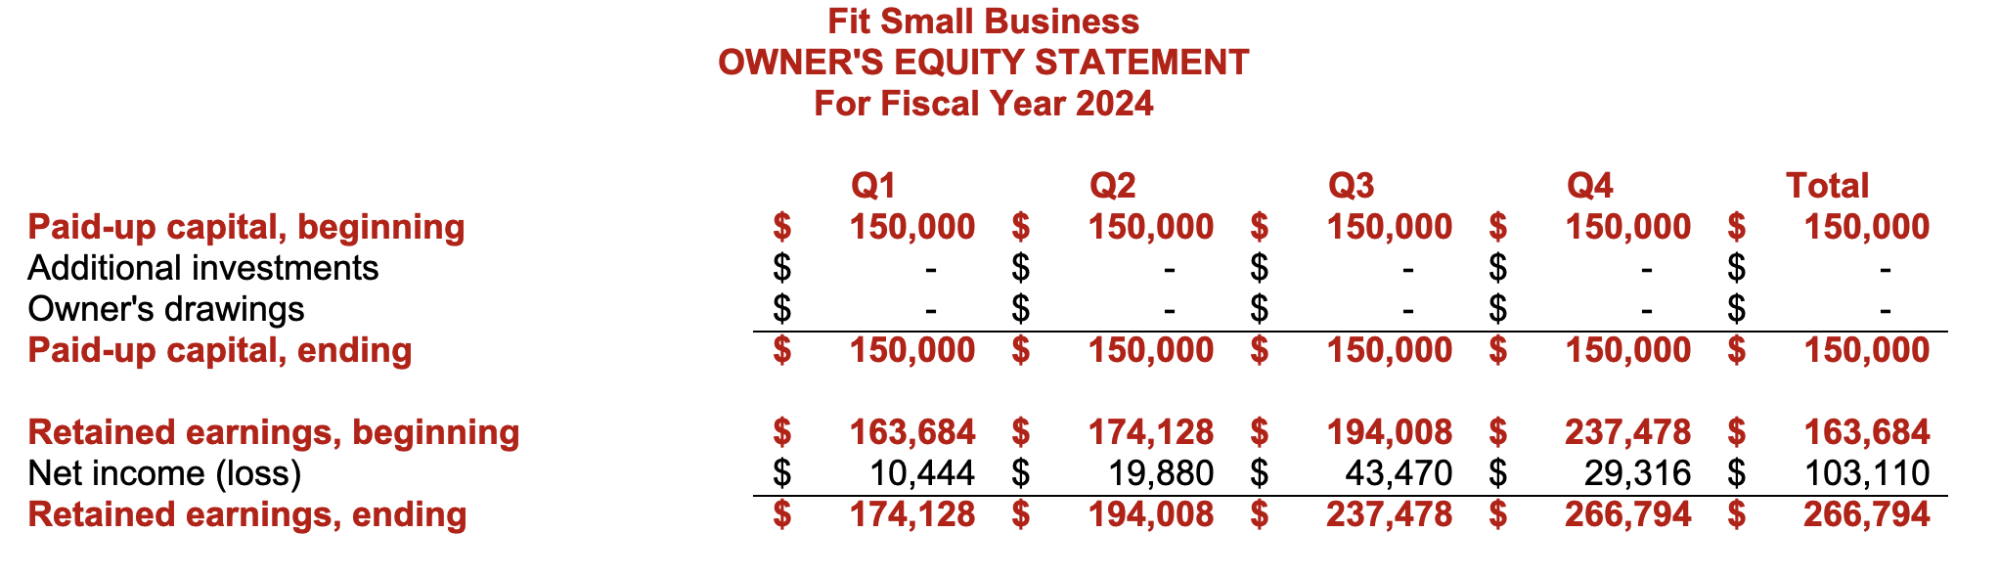 Image showing the proforma owner's equity statement